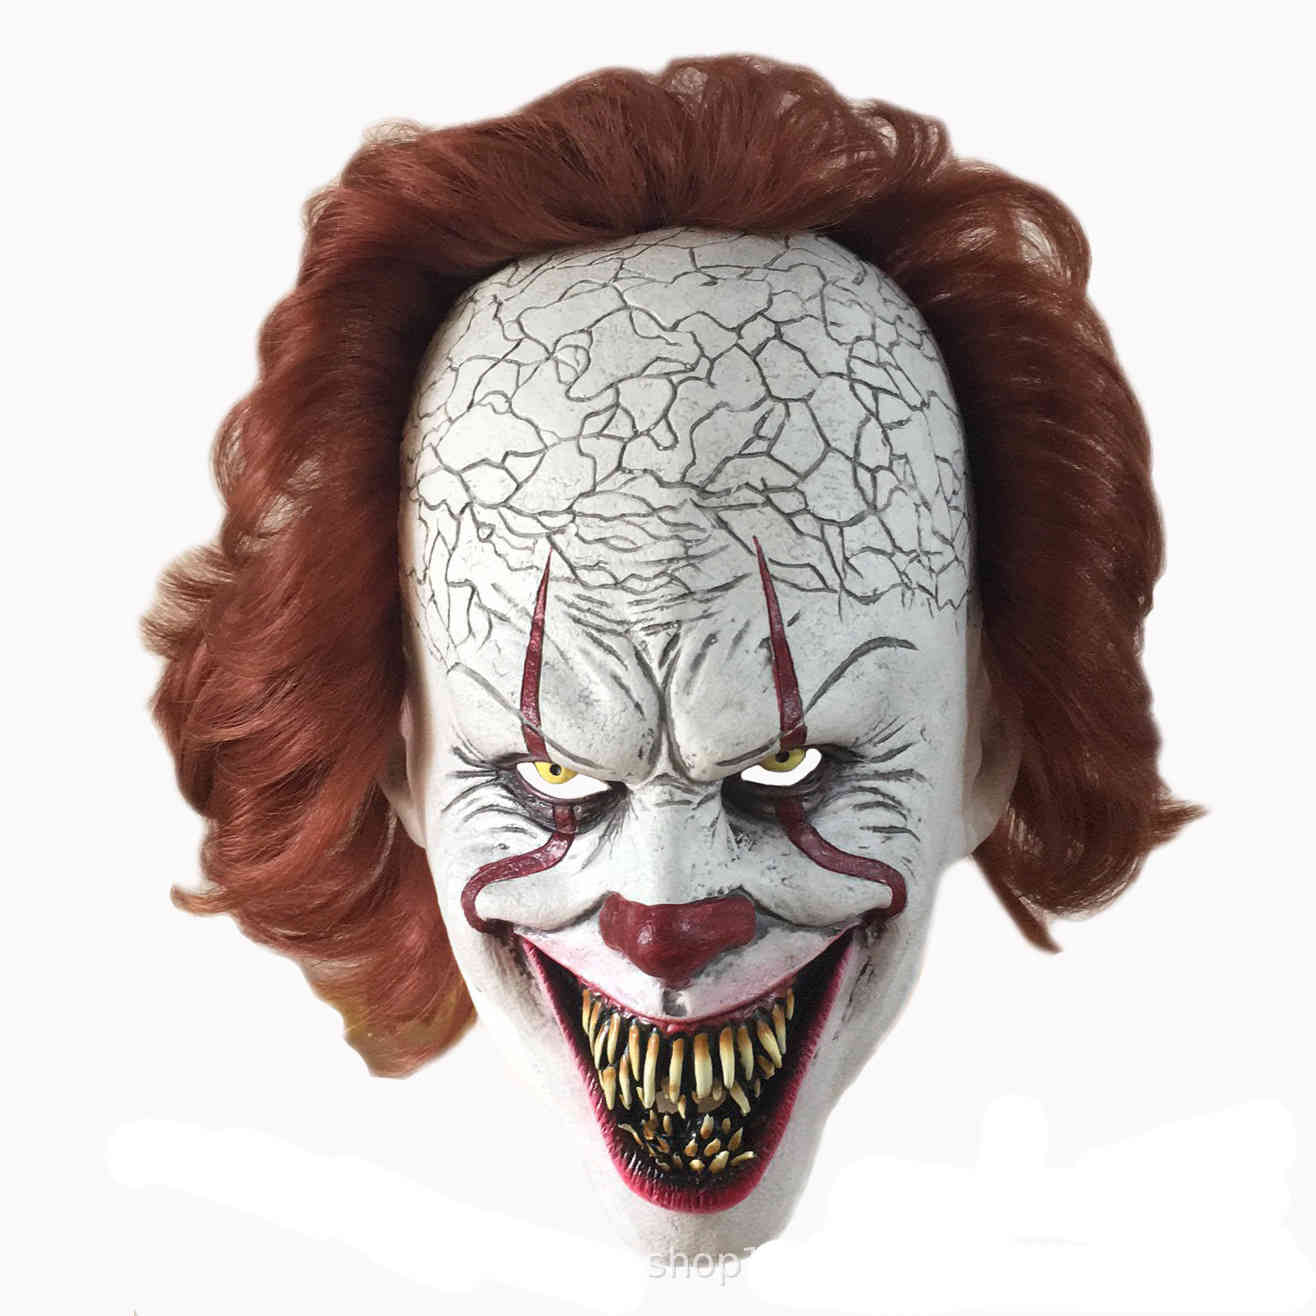 

Halloween Mask Creepy Scary Clown Full Face Horror Movie pennywise Joker Costume Party Festival Cosplay Prop Decoration